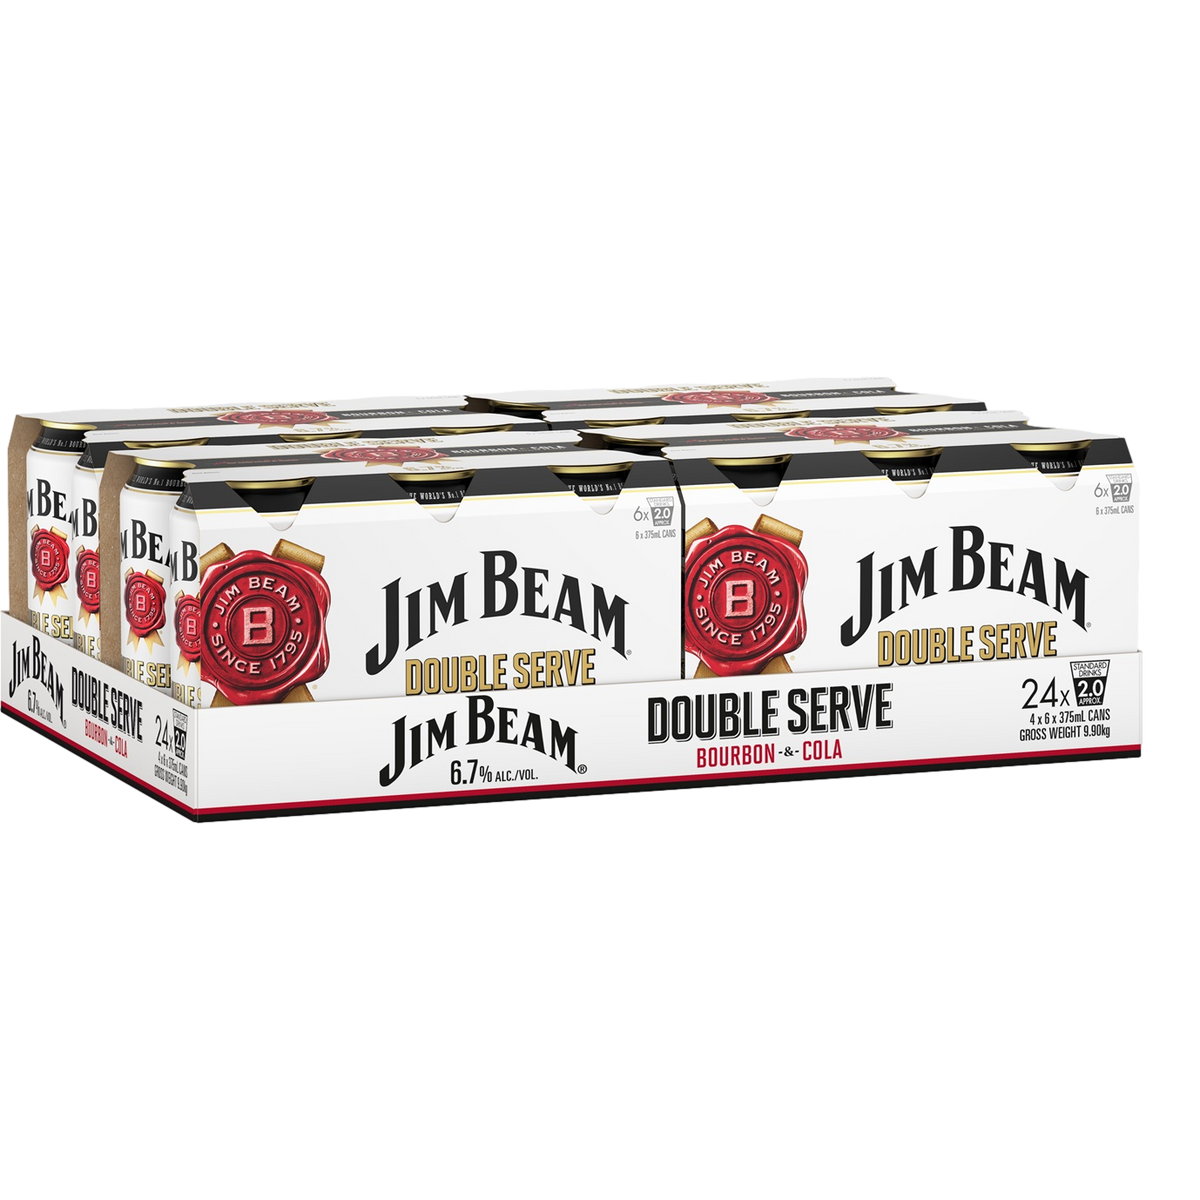 Jim Beam White & Cola Double Serve 6.7% 375ml Can Case of 24